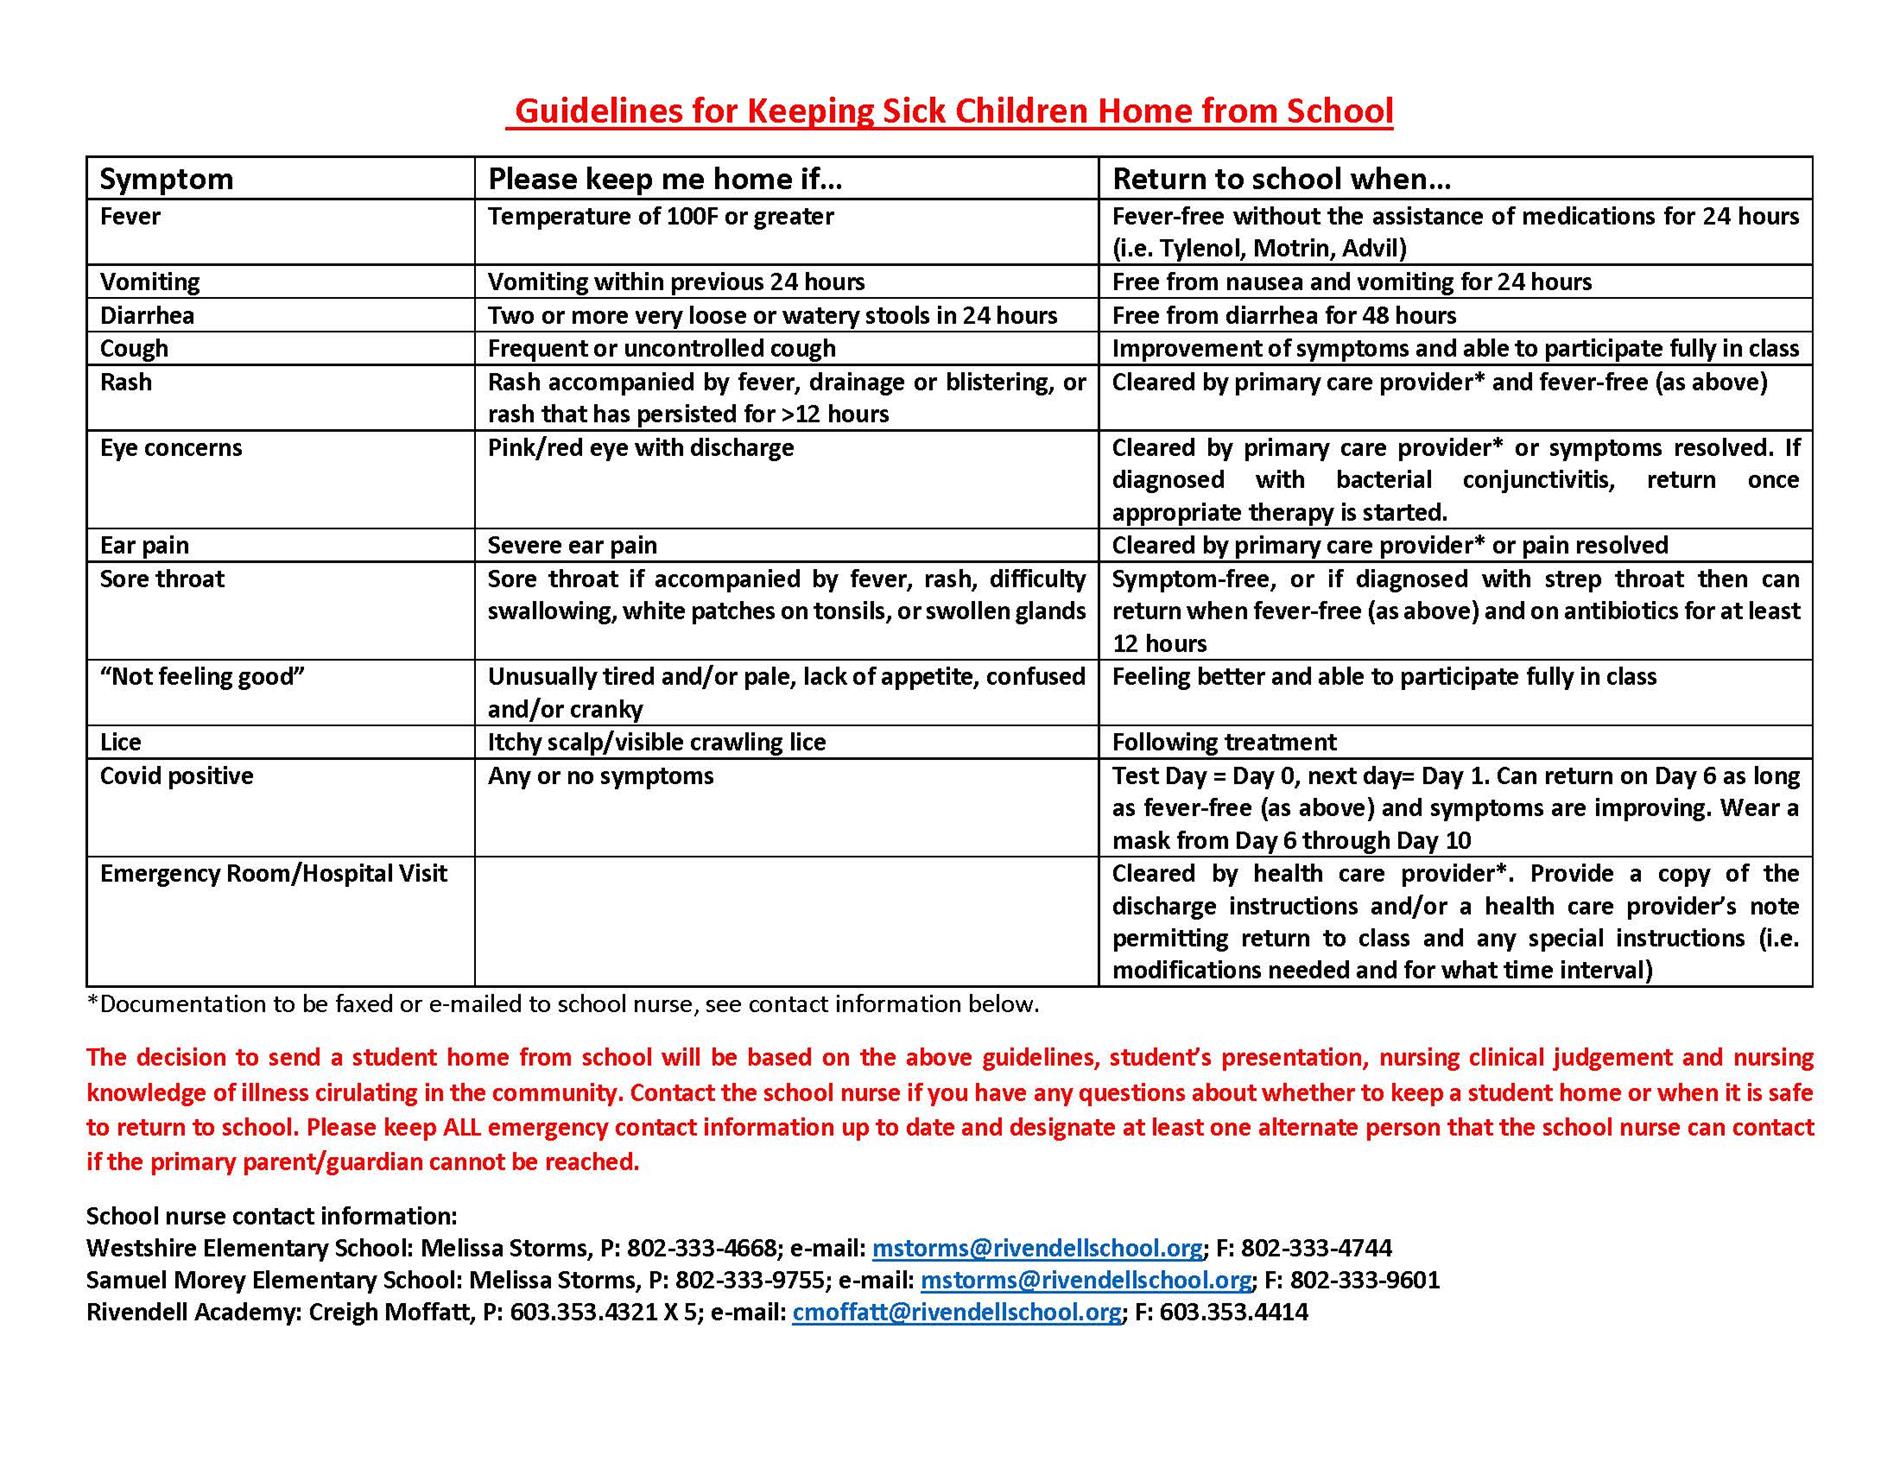 Guidelines for Keeping Sick Children home from School